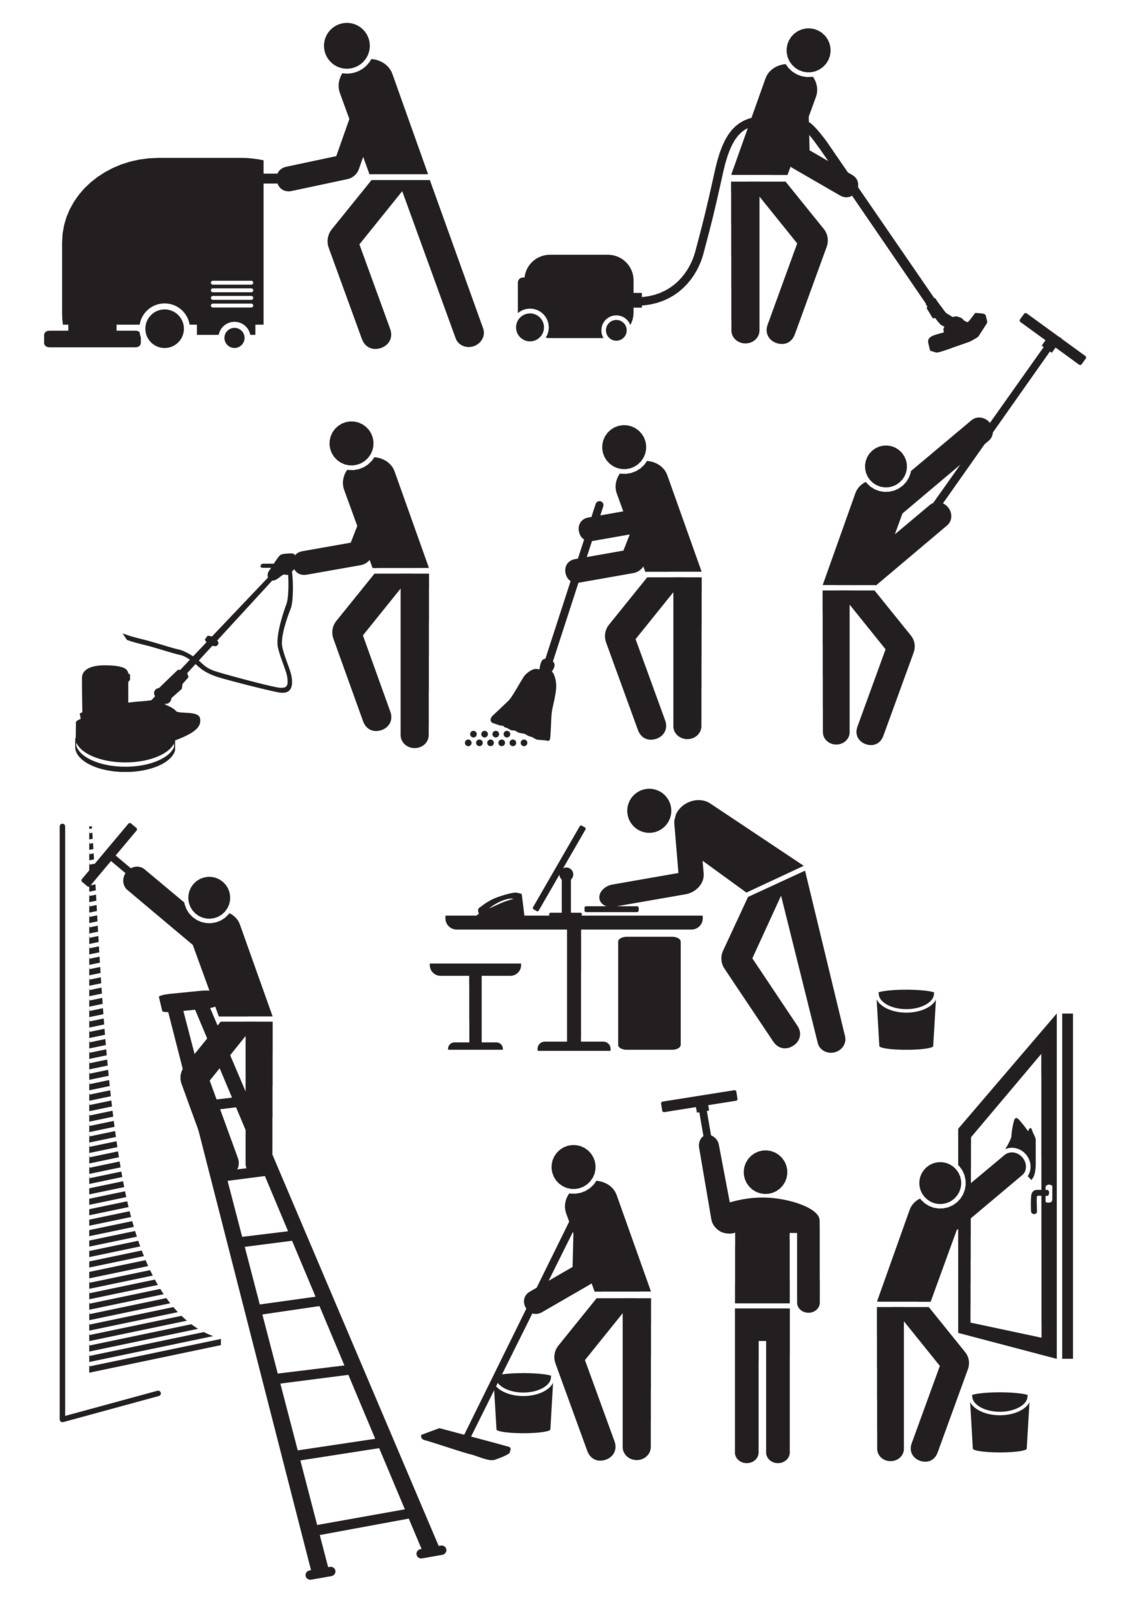 cleaners pictogram by scusi